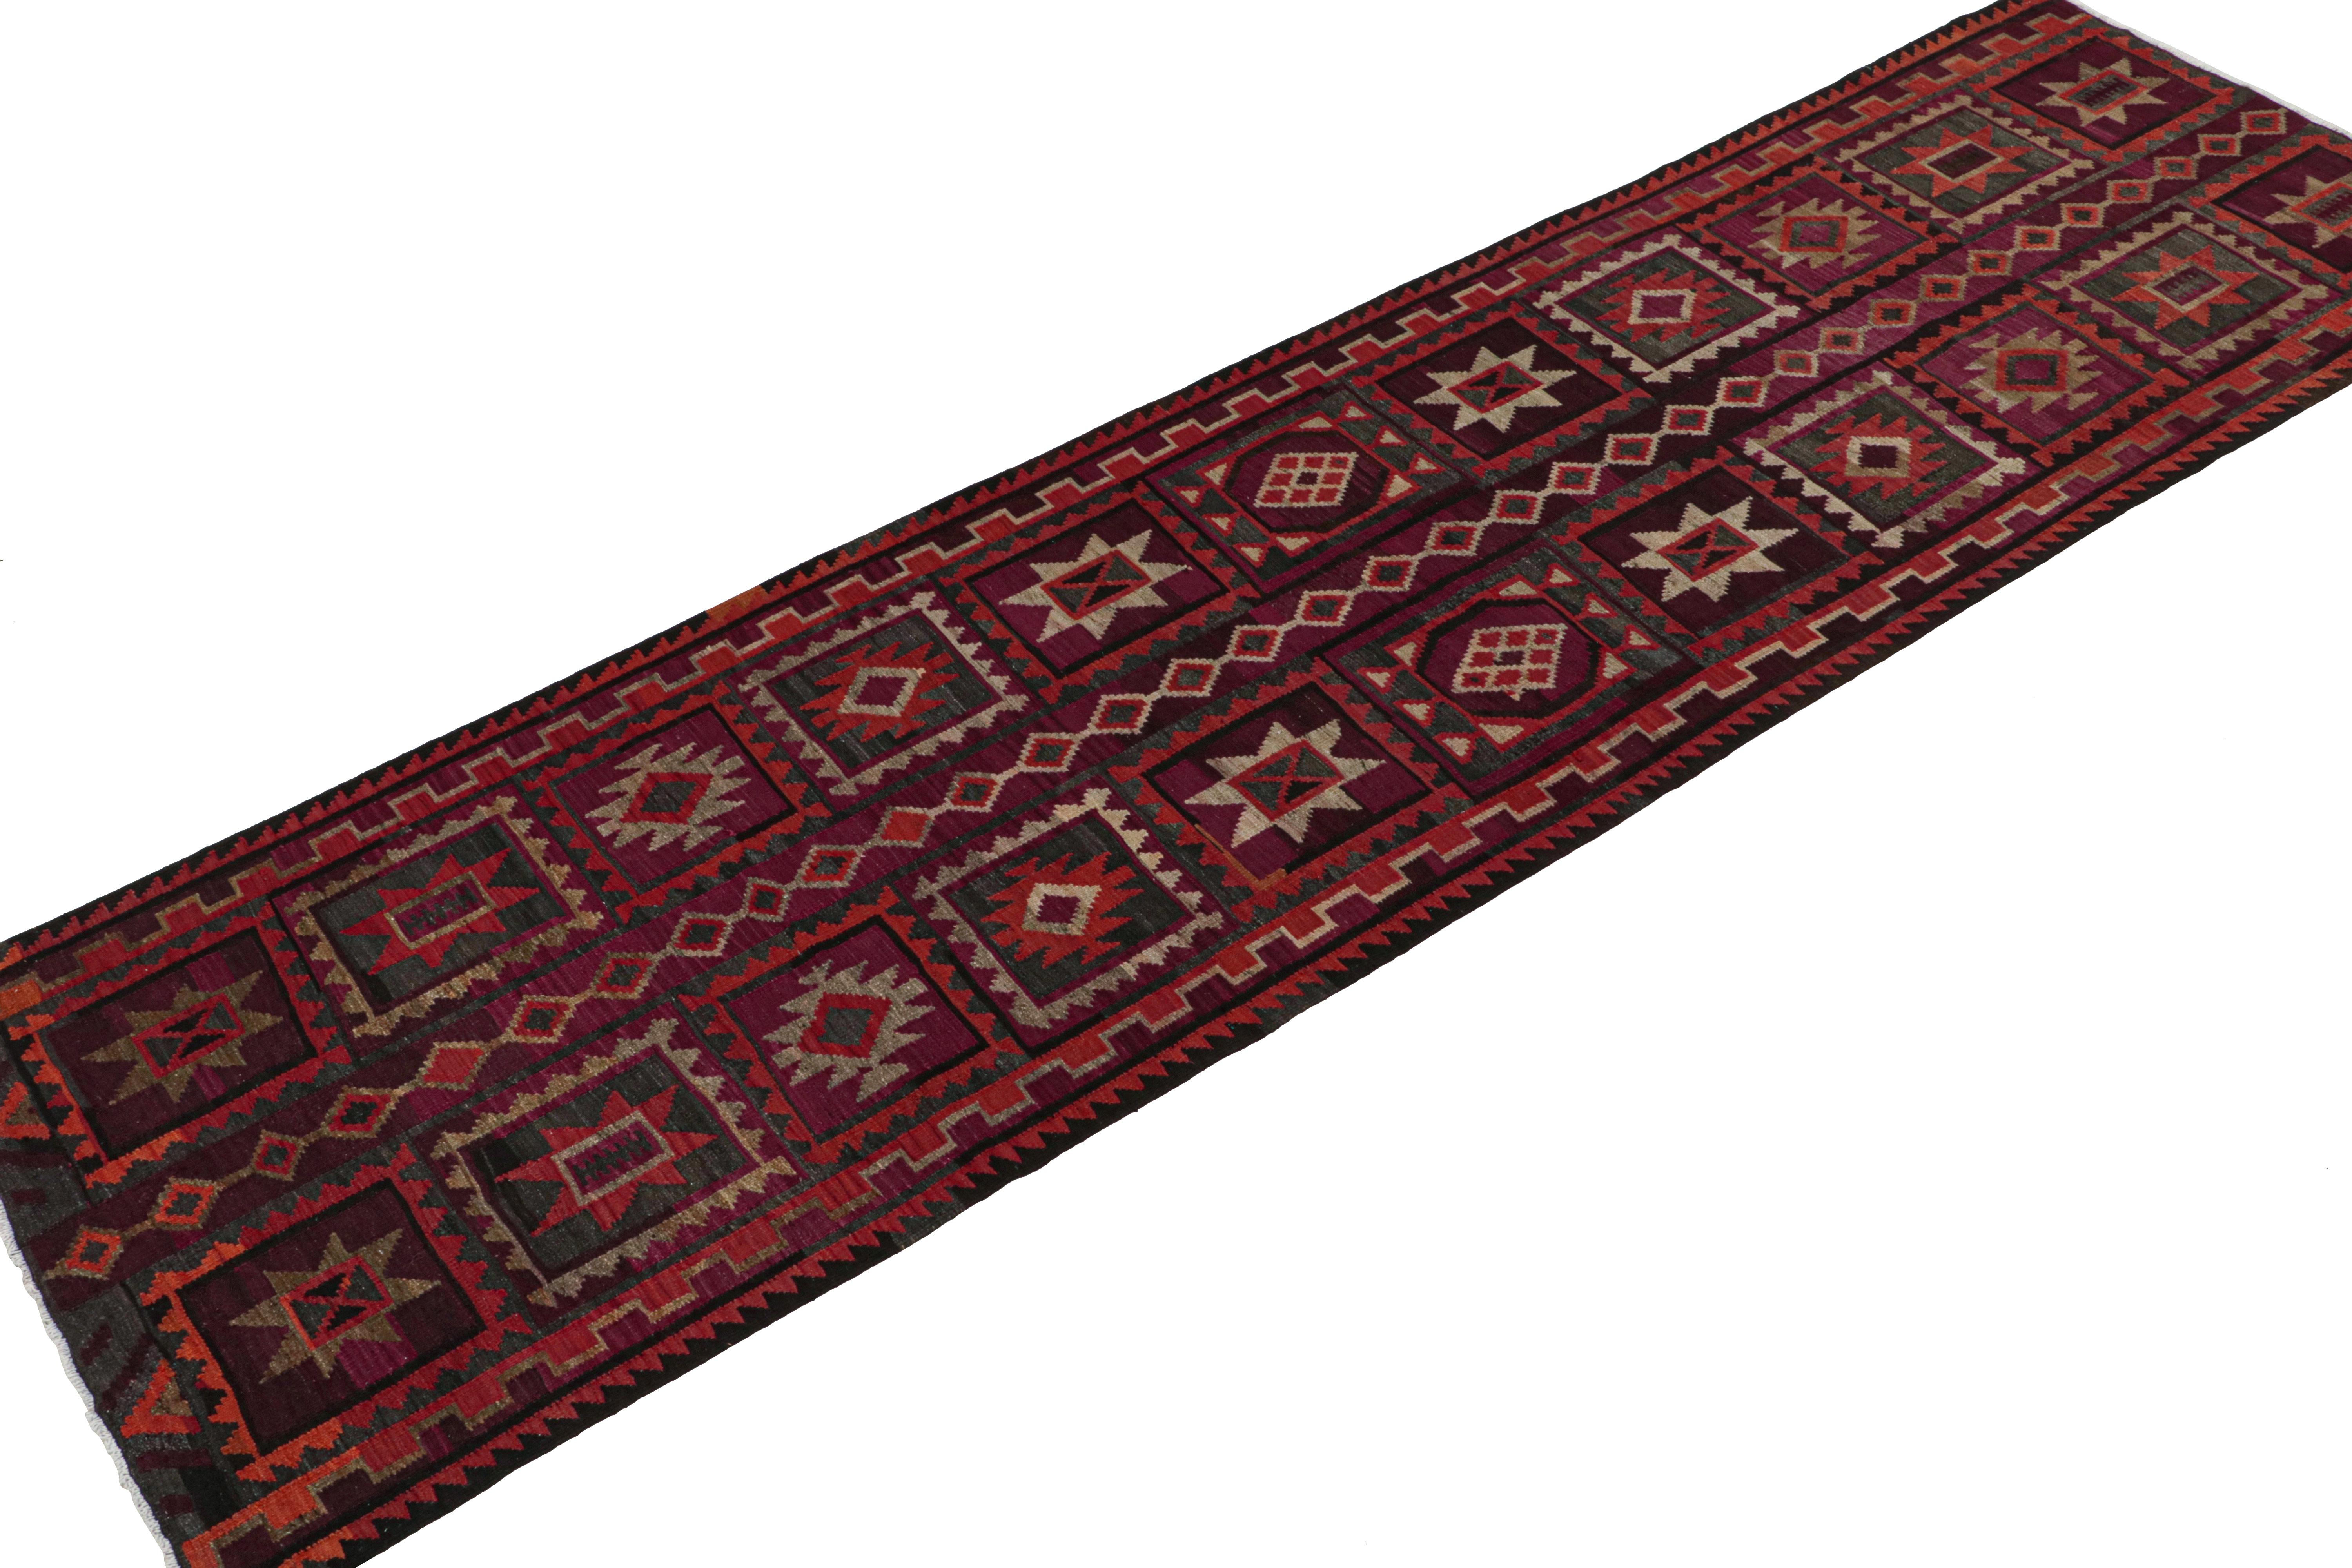 Tribal Vintage Shahsavan Persian Kilim in Polychromatic Patterns For Sale